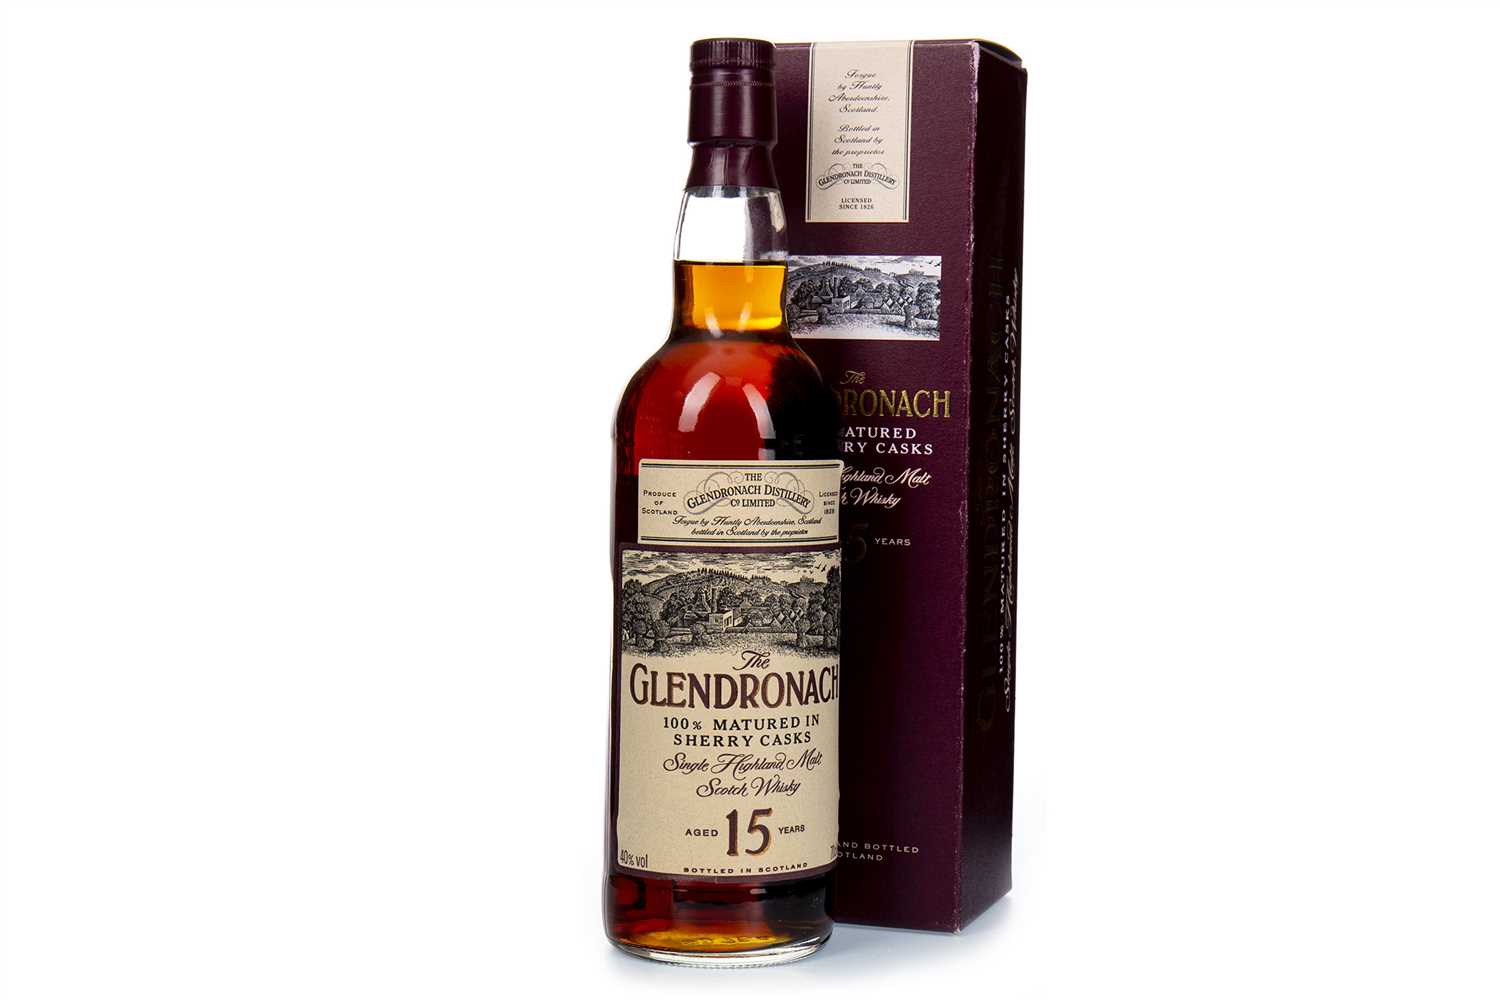 Lot 56 - GLENDROANCH AGED 15 YEARS